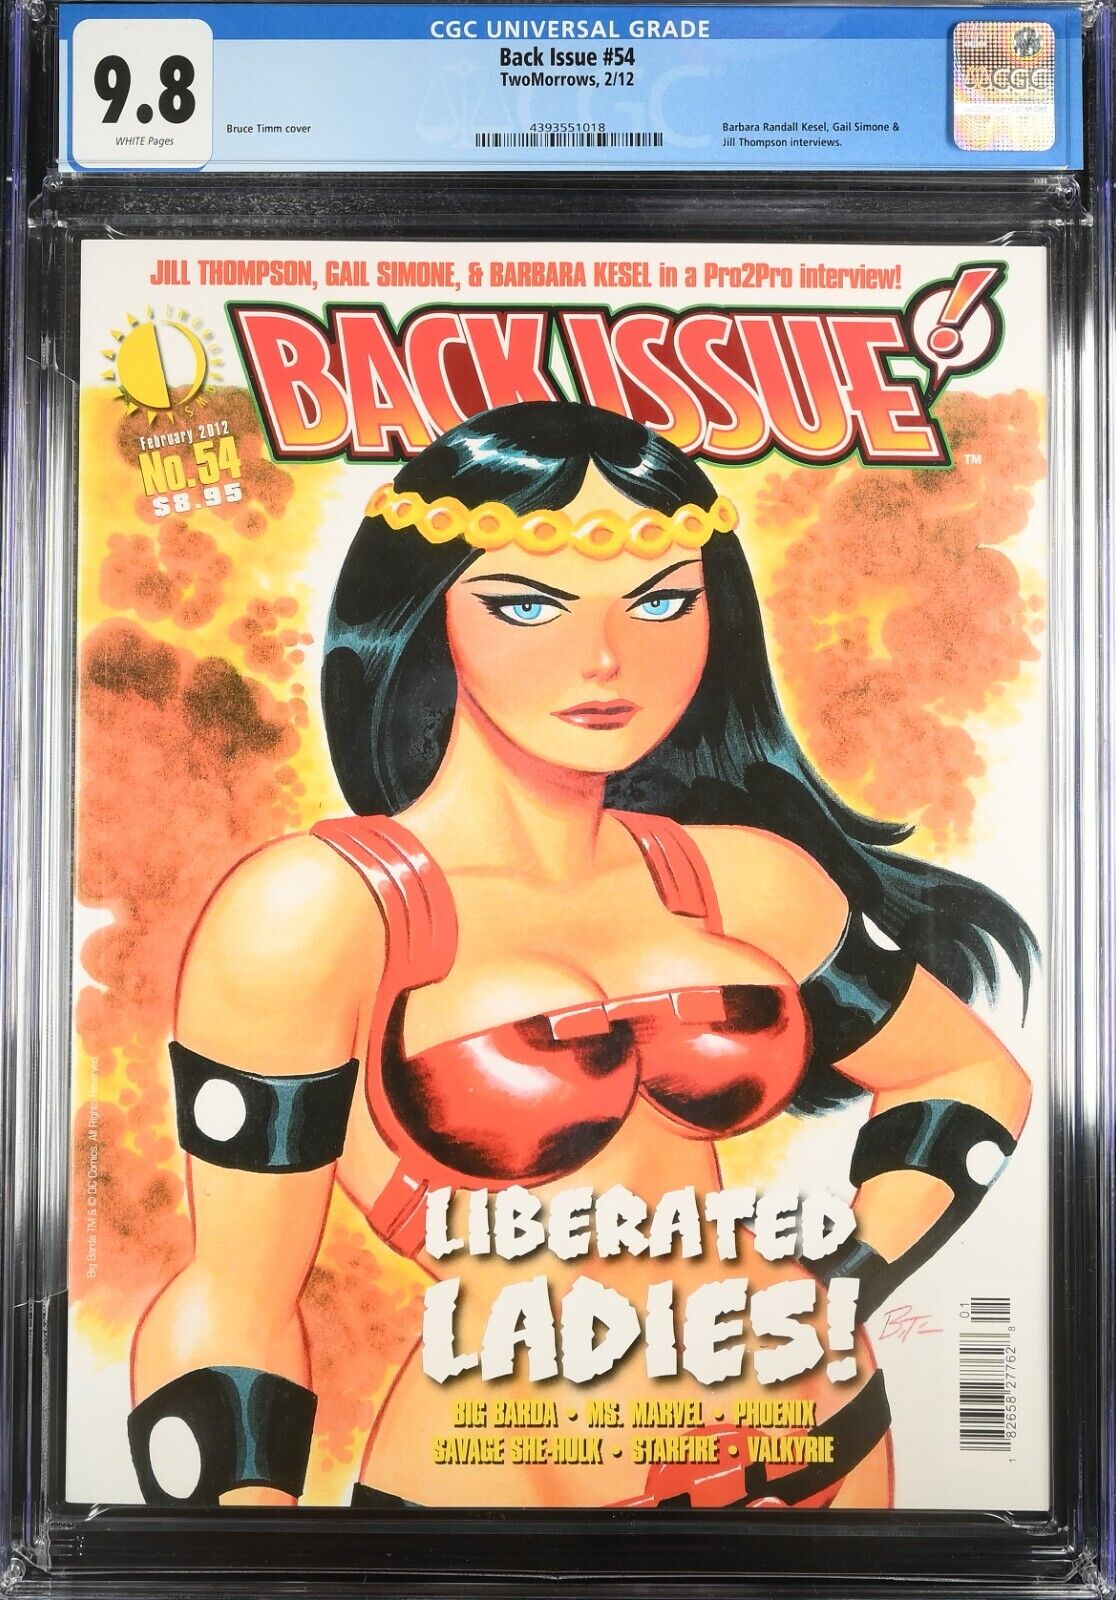 TWOMORROWS BACK ISSUE #54 - CGC 9.8 WP - NM/MT - BRUCE TIMM COVER - MAGAZINE